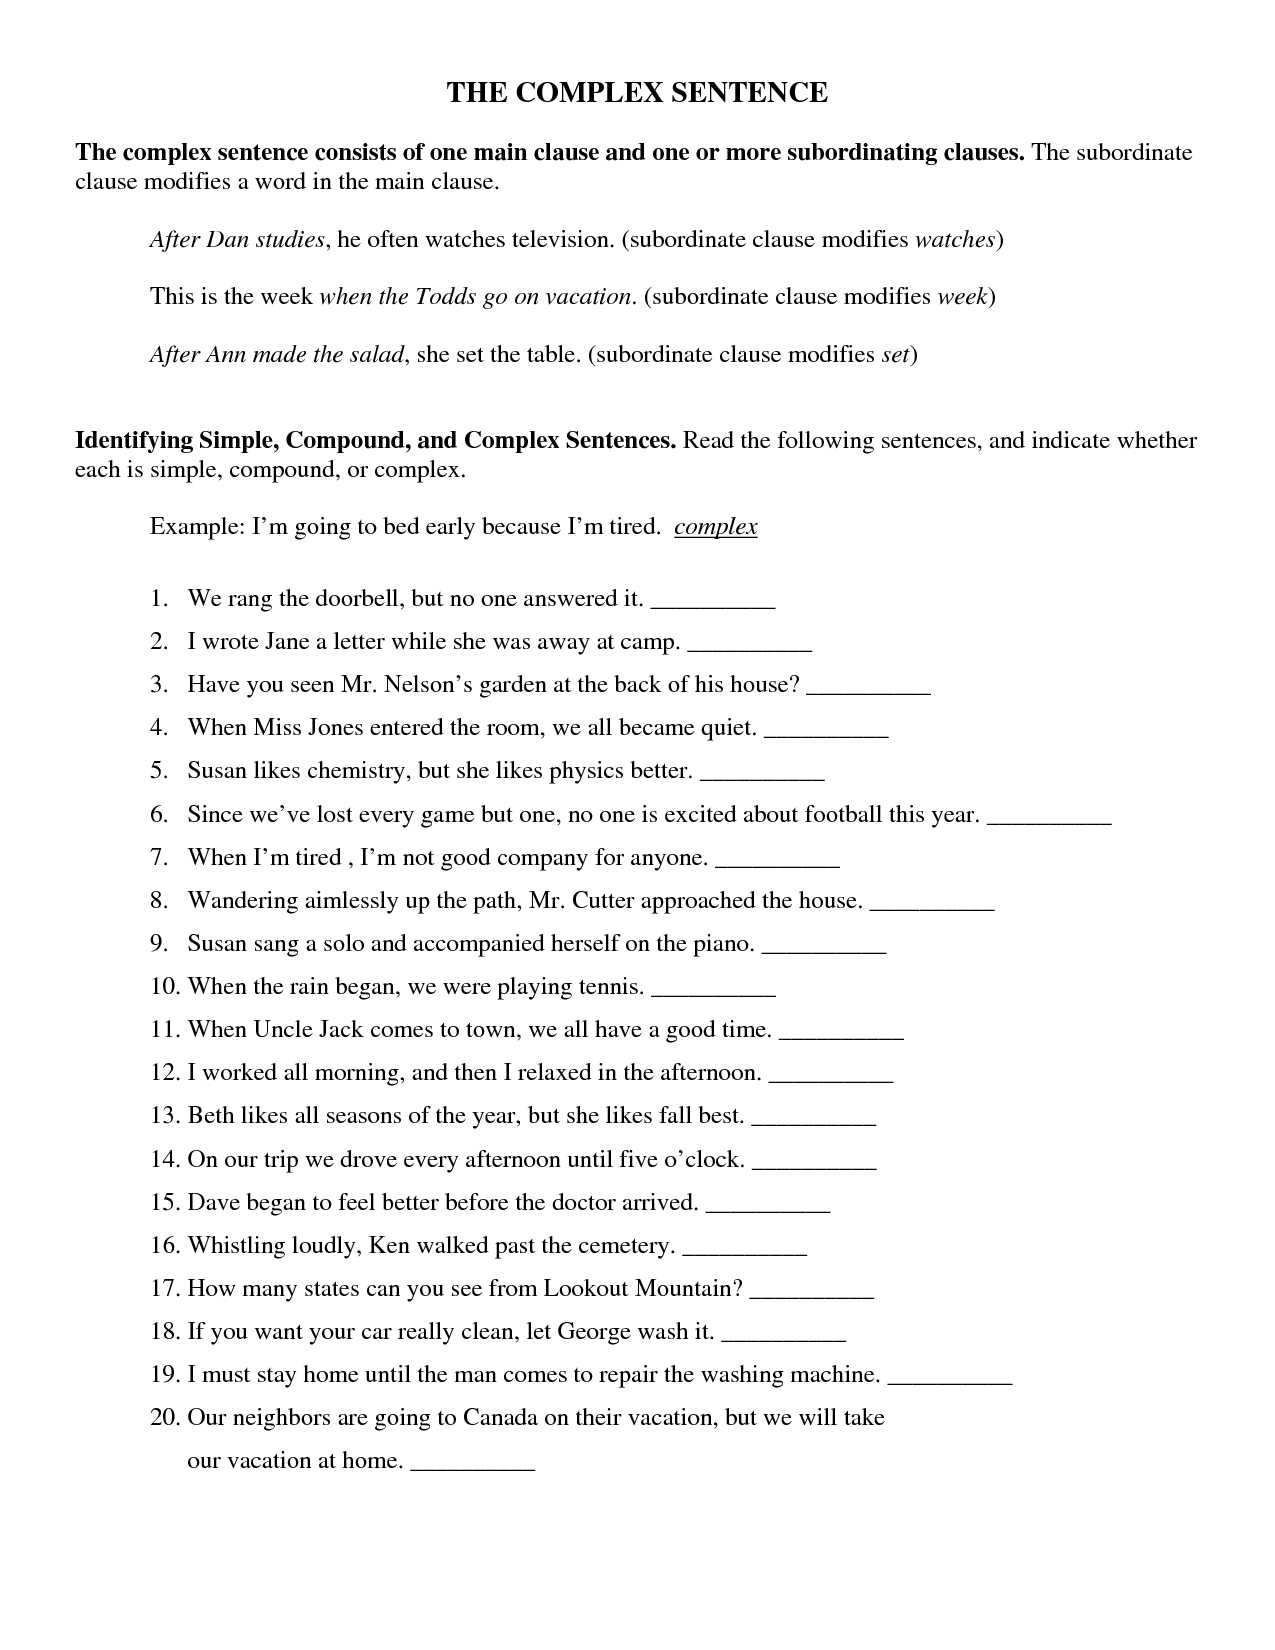 Naming Covalent Compounds Worksheet Answers Along with Simple Plex and Pound Sentences Worksheets the Best Worksheets